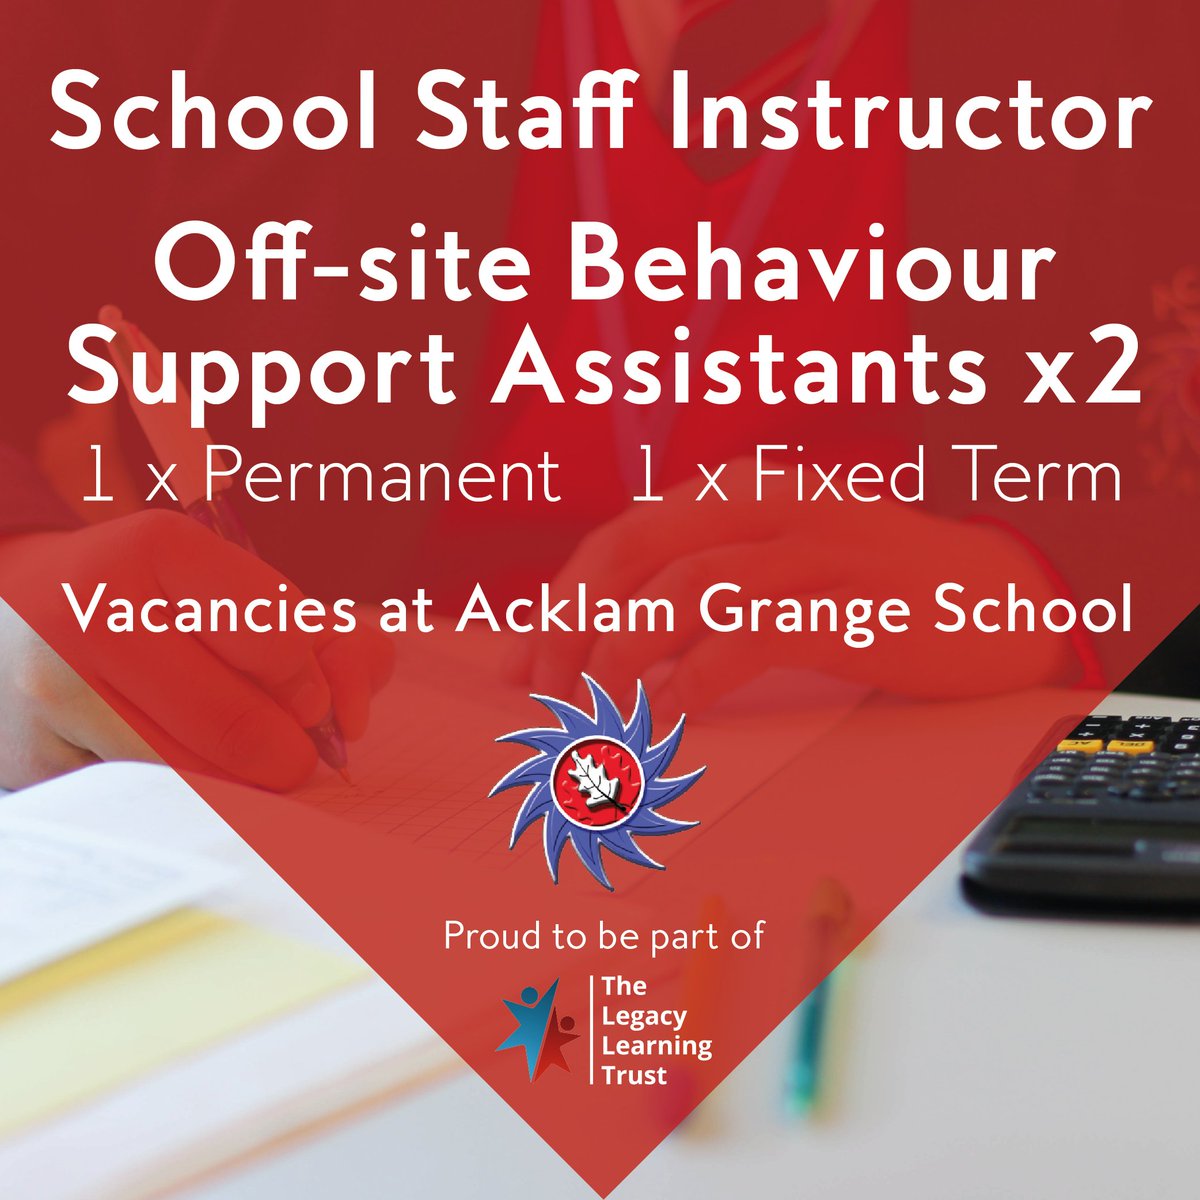 We've got some exciting opportunities to join our off-site provision team 👇 School Staff Instructor - Combined Cadet Force ➡️ acklamgrange.org.uk/school-staff-i… Off-site Behaviour Support Assistants (1 x Permanent/1 x Fixed Term) ➡️ acklamgrange.org.uk/off-site-behav… ➡️ acklamgrange.org.uk/off-site-behav…